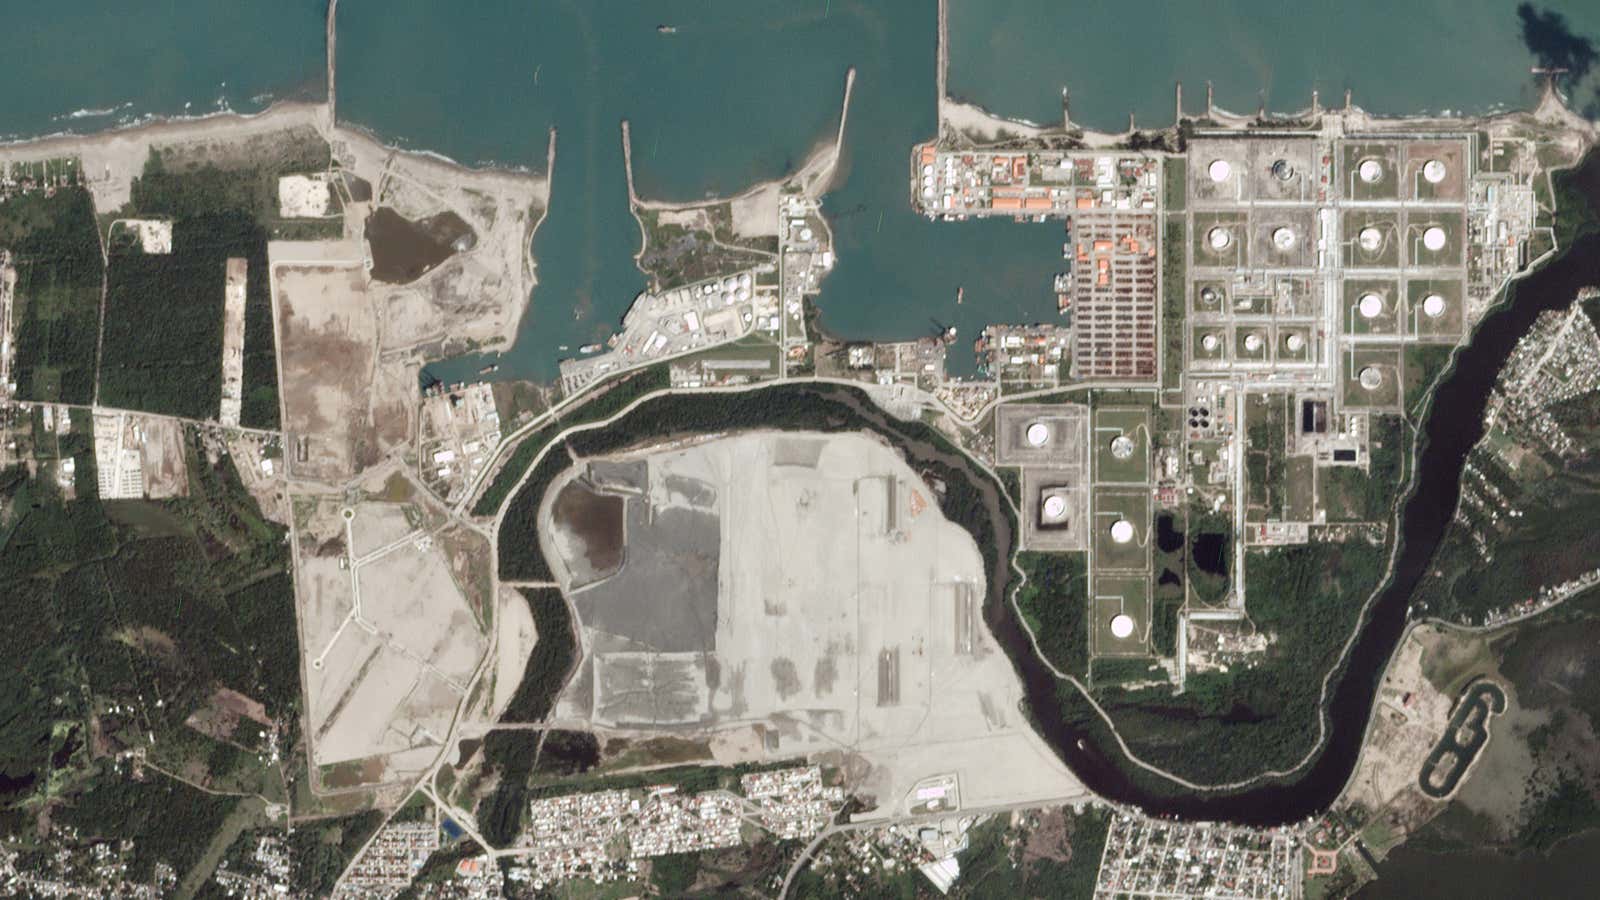 Satellite imagery of the construction site for an oil refinery. Captured on Feb. 25, 2020.